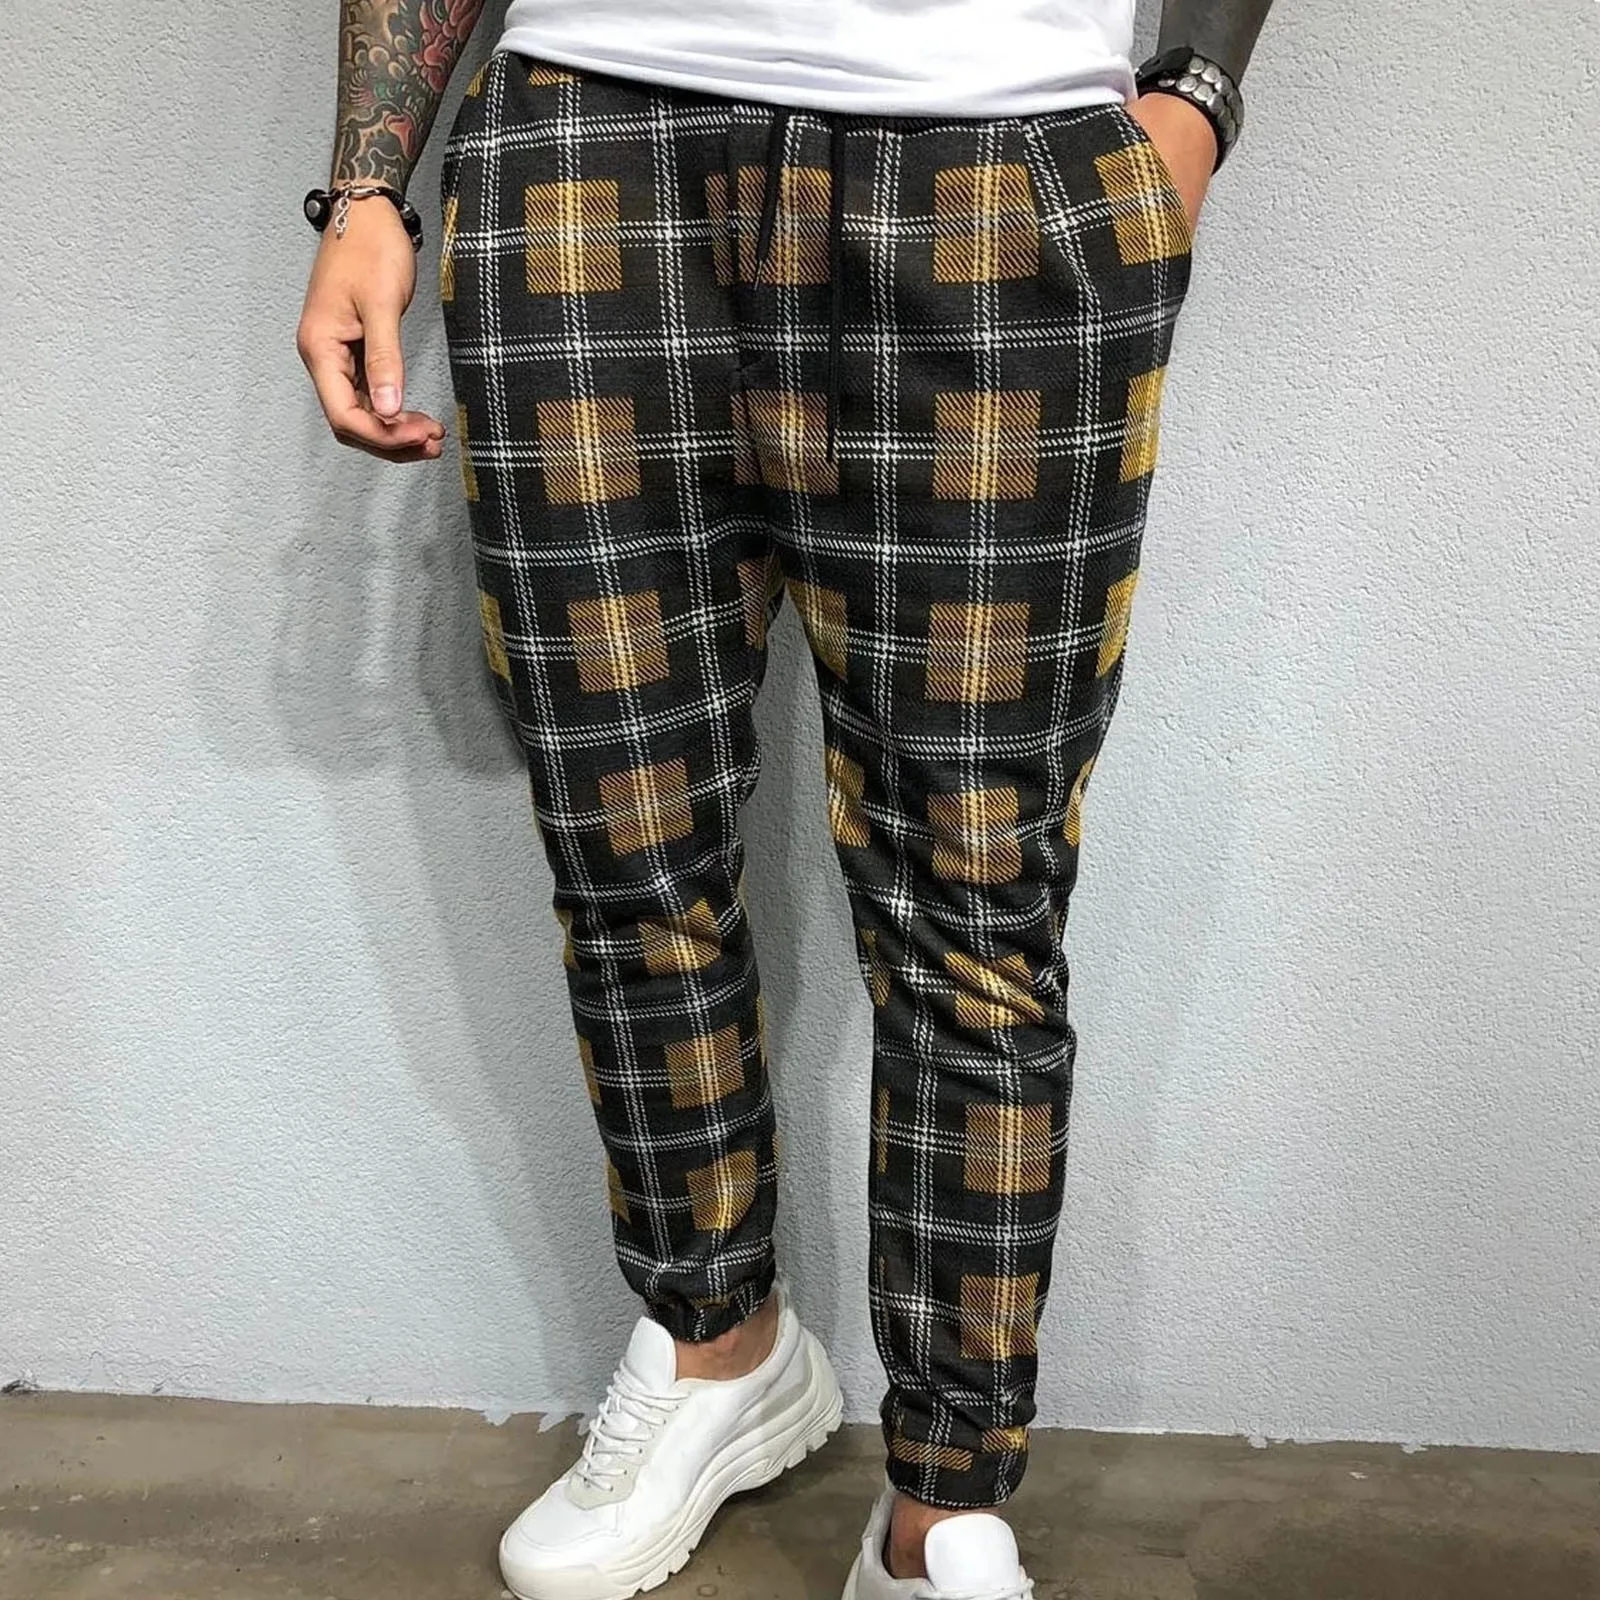 Men's Sports Plaid Sweatpants Fitness Trousers Casual Jogging Street Tracksuit Pants With Pockets Trousers Streetwear men's workout joggers